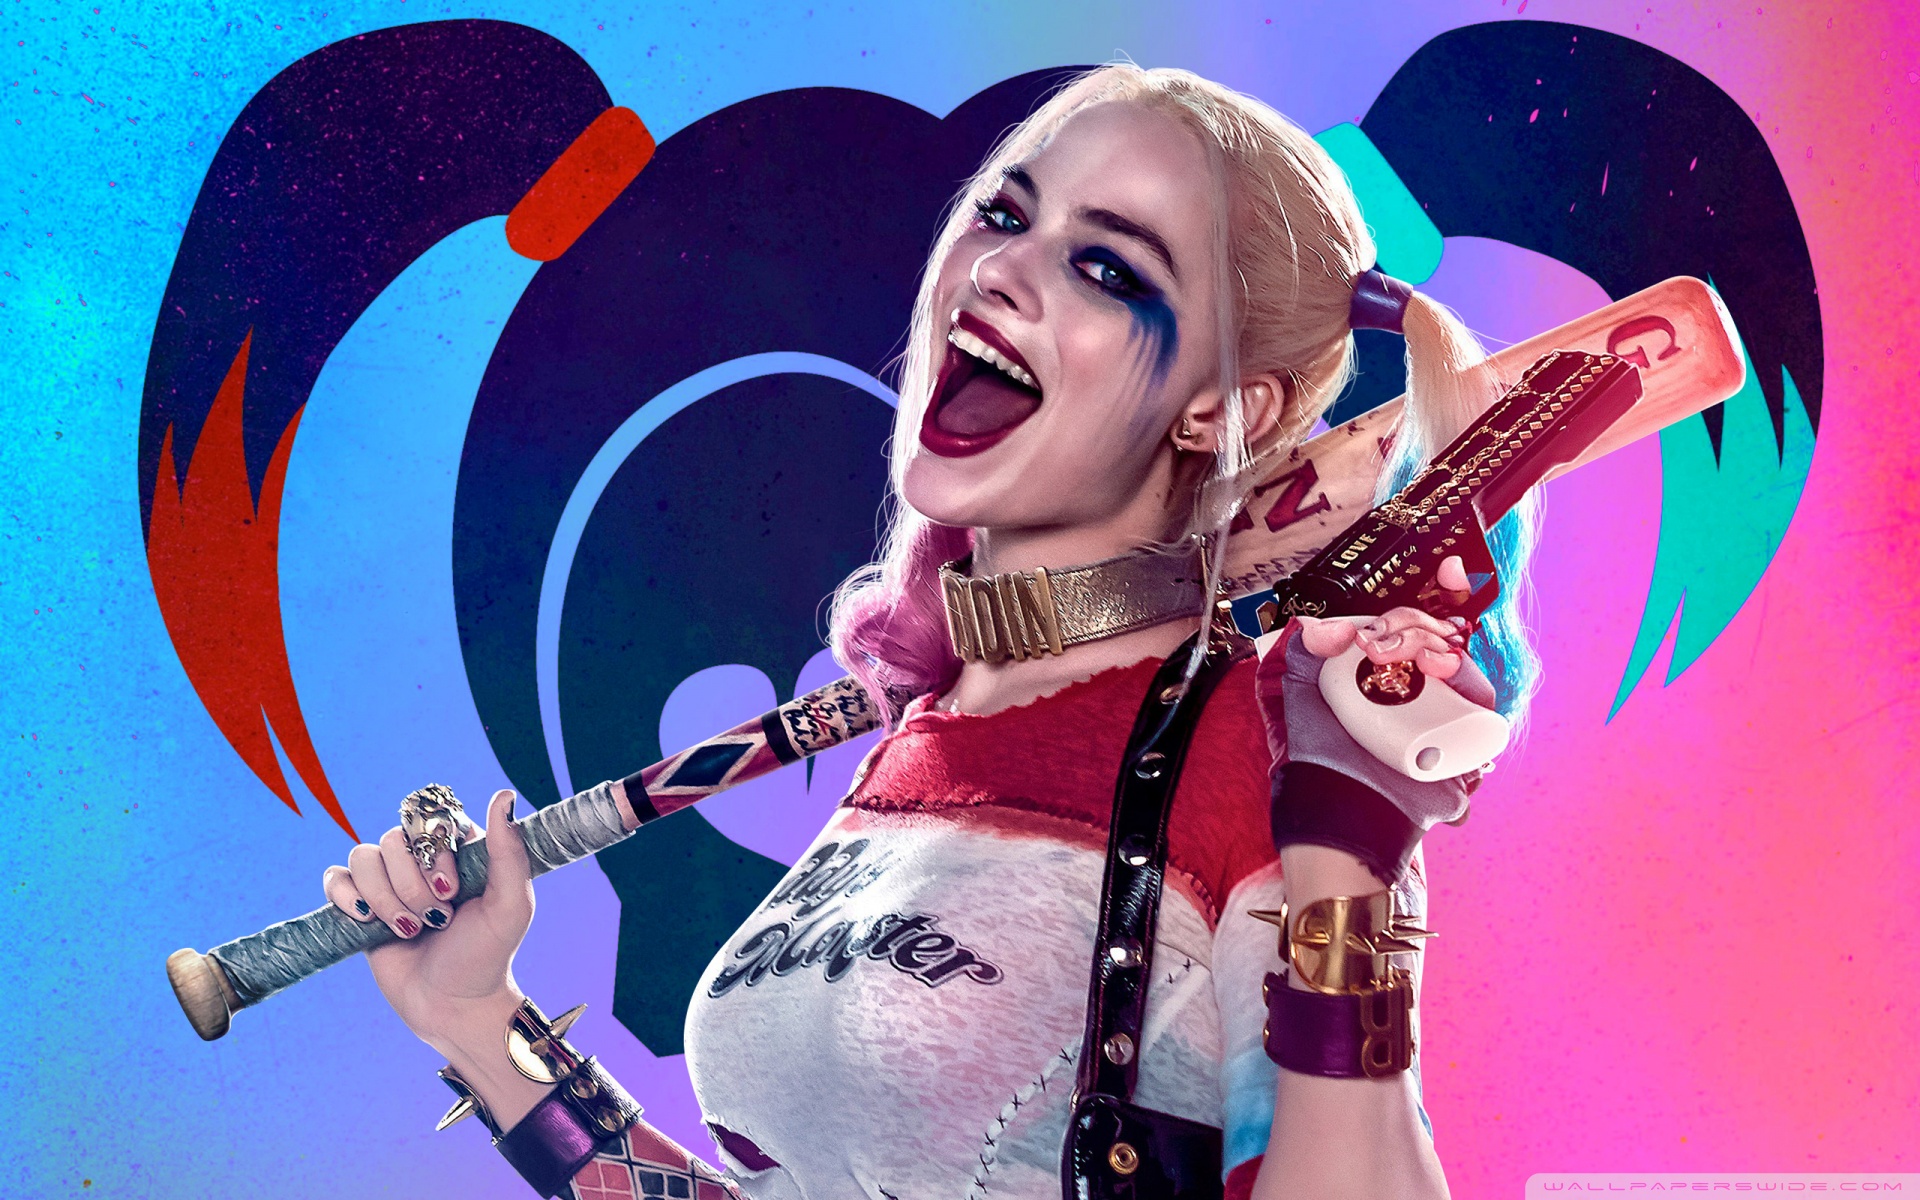 Download Suicide Squad Harley Quinn UltraHD Free Wallpaper.